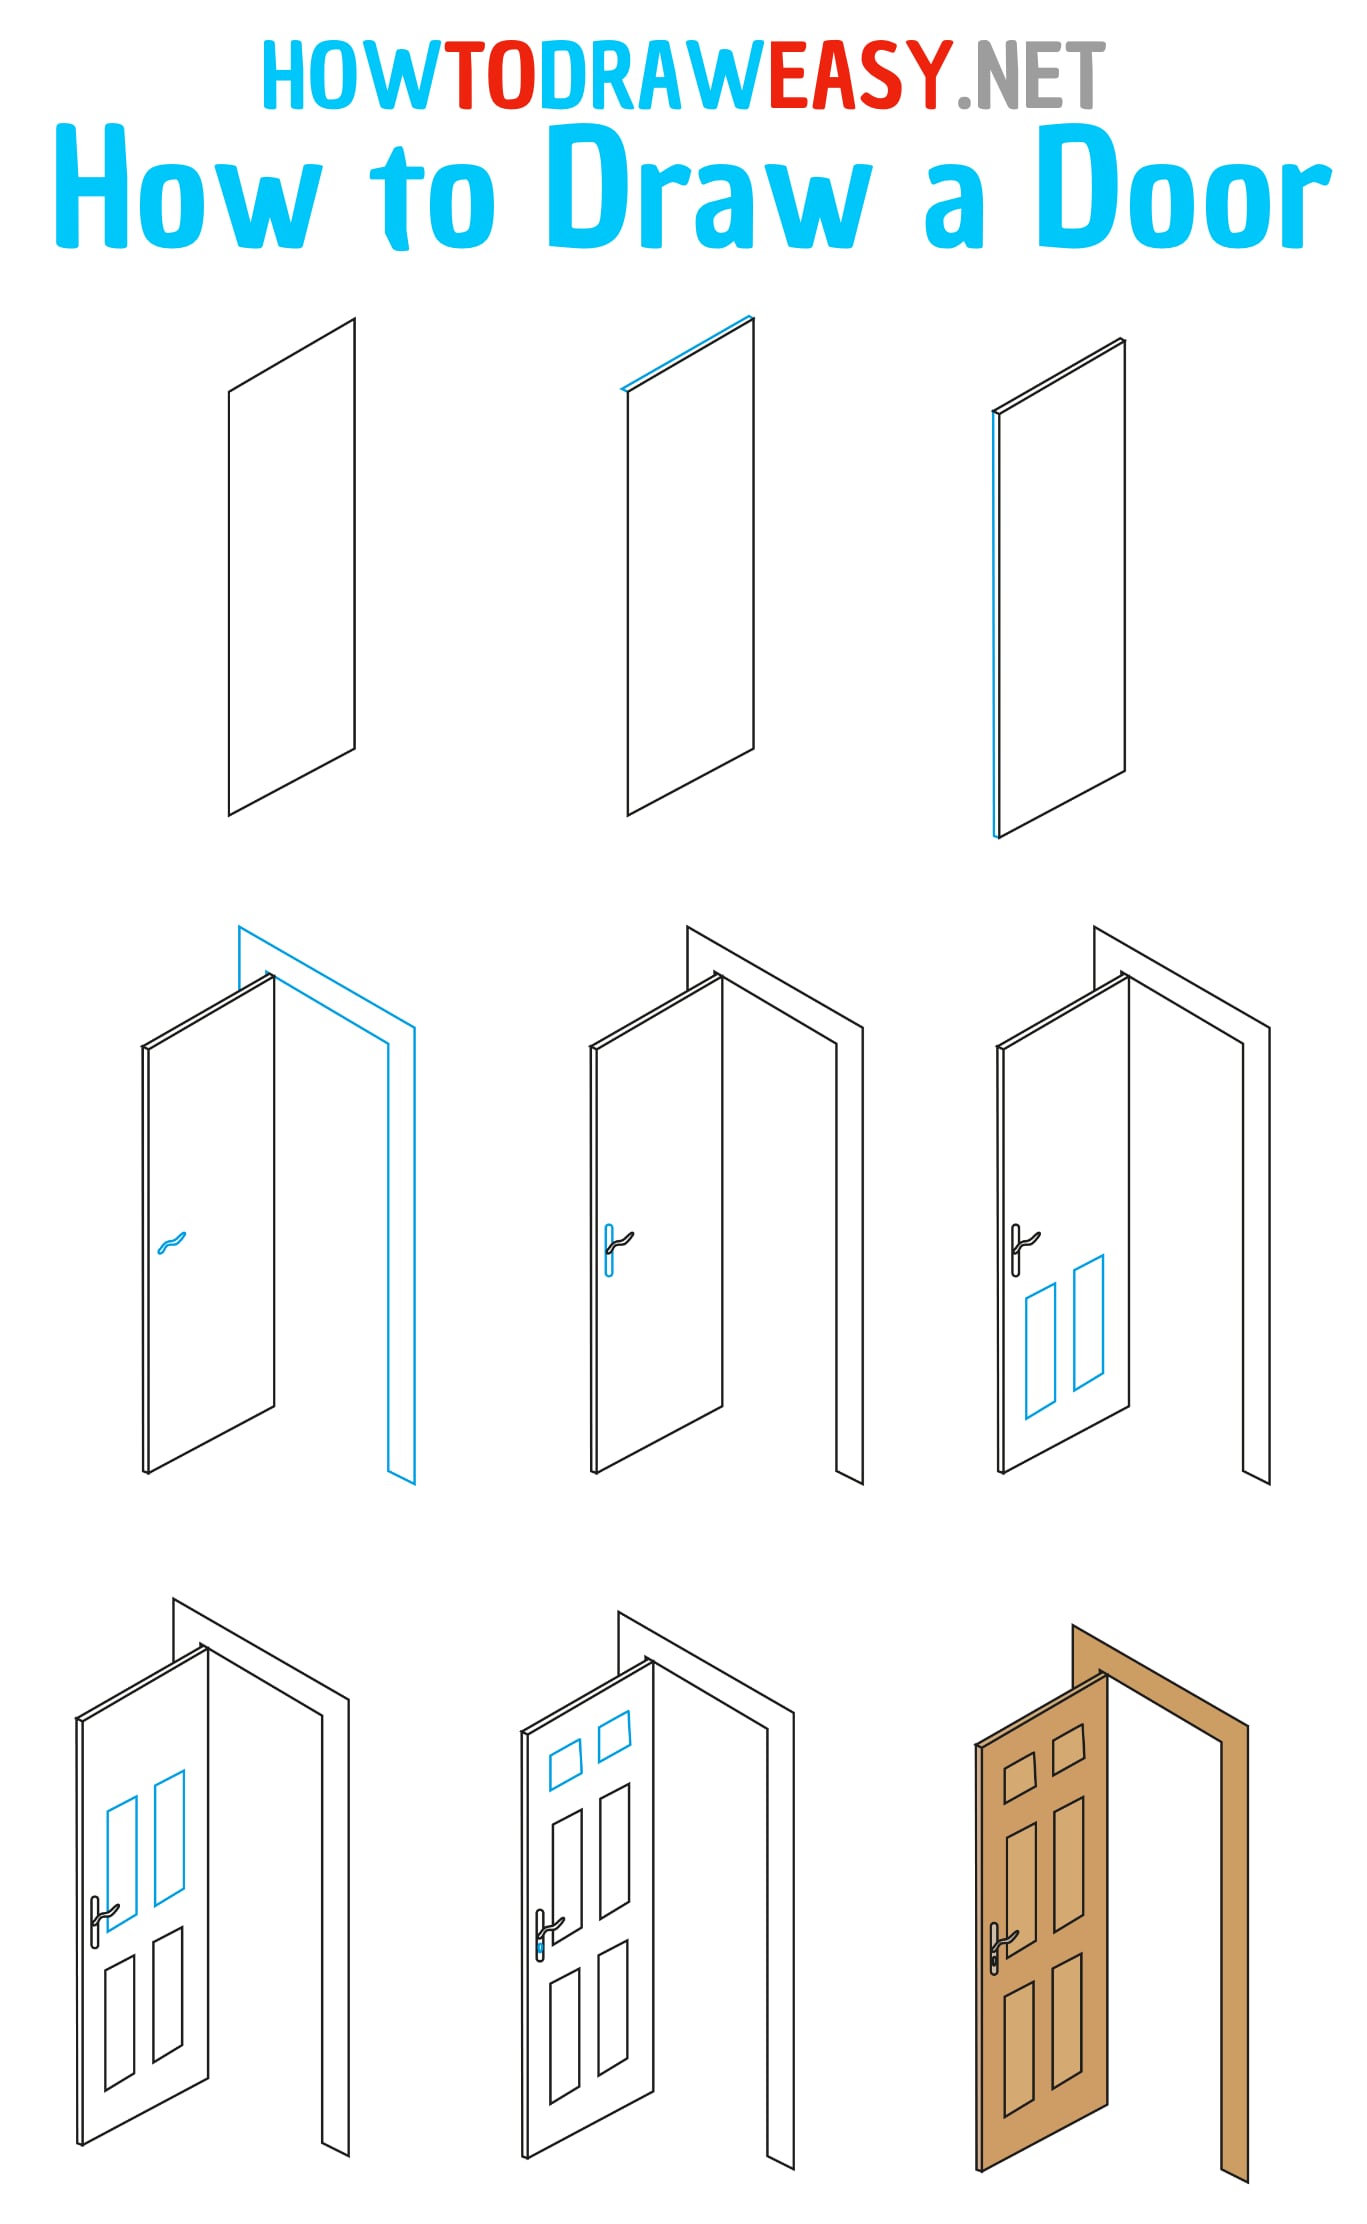 How to Draw a Door Step by Step